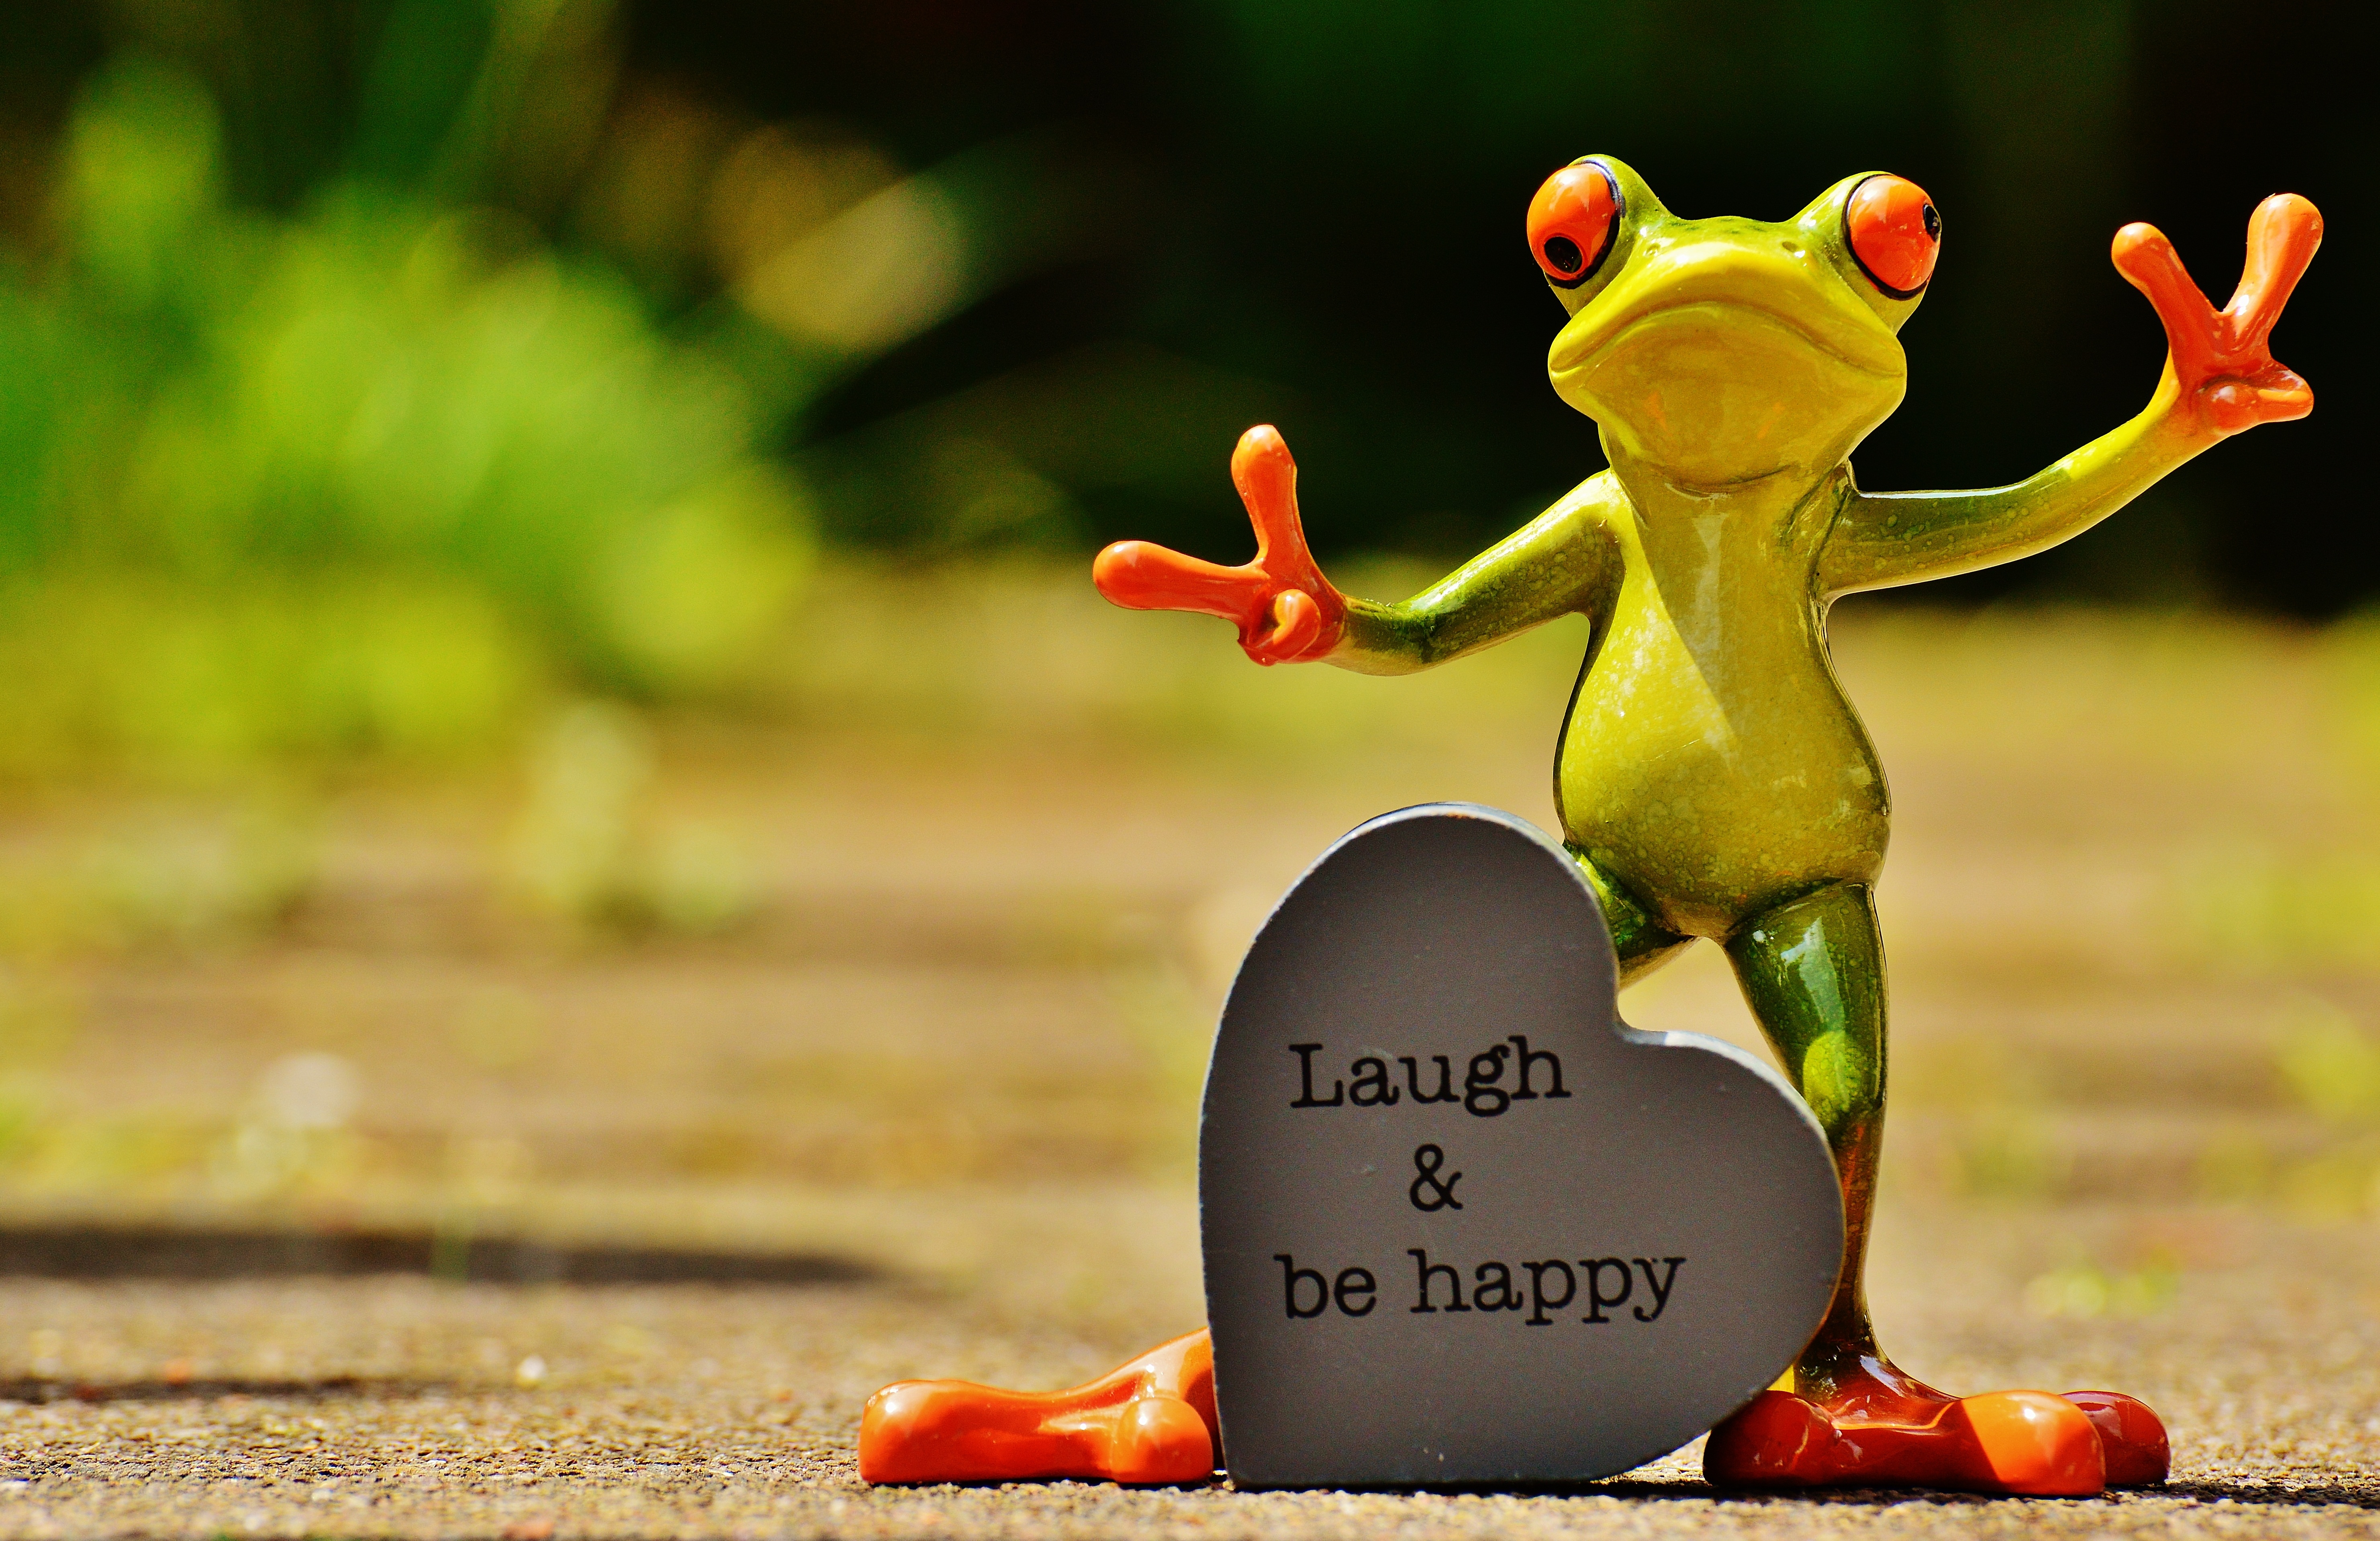 Laugh and be happy frog by Alexas_Fotos